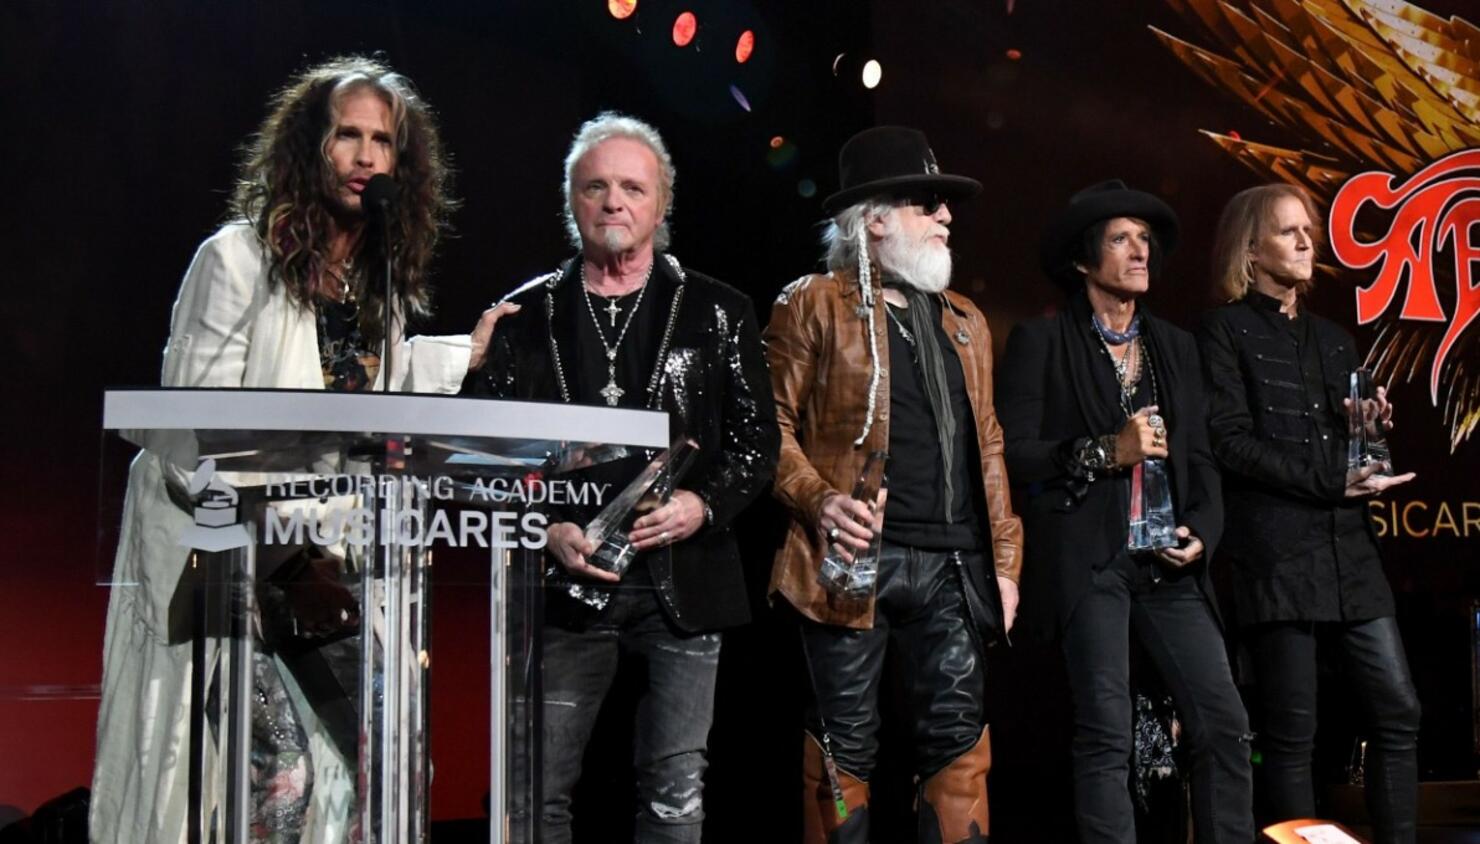 Joey Kramer Joins Aerosmith Onstage At MusiCares Honors, Does Not Perform |  iHeart